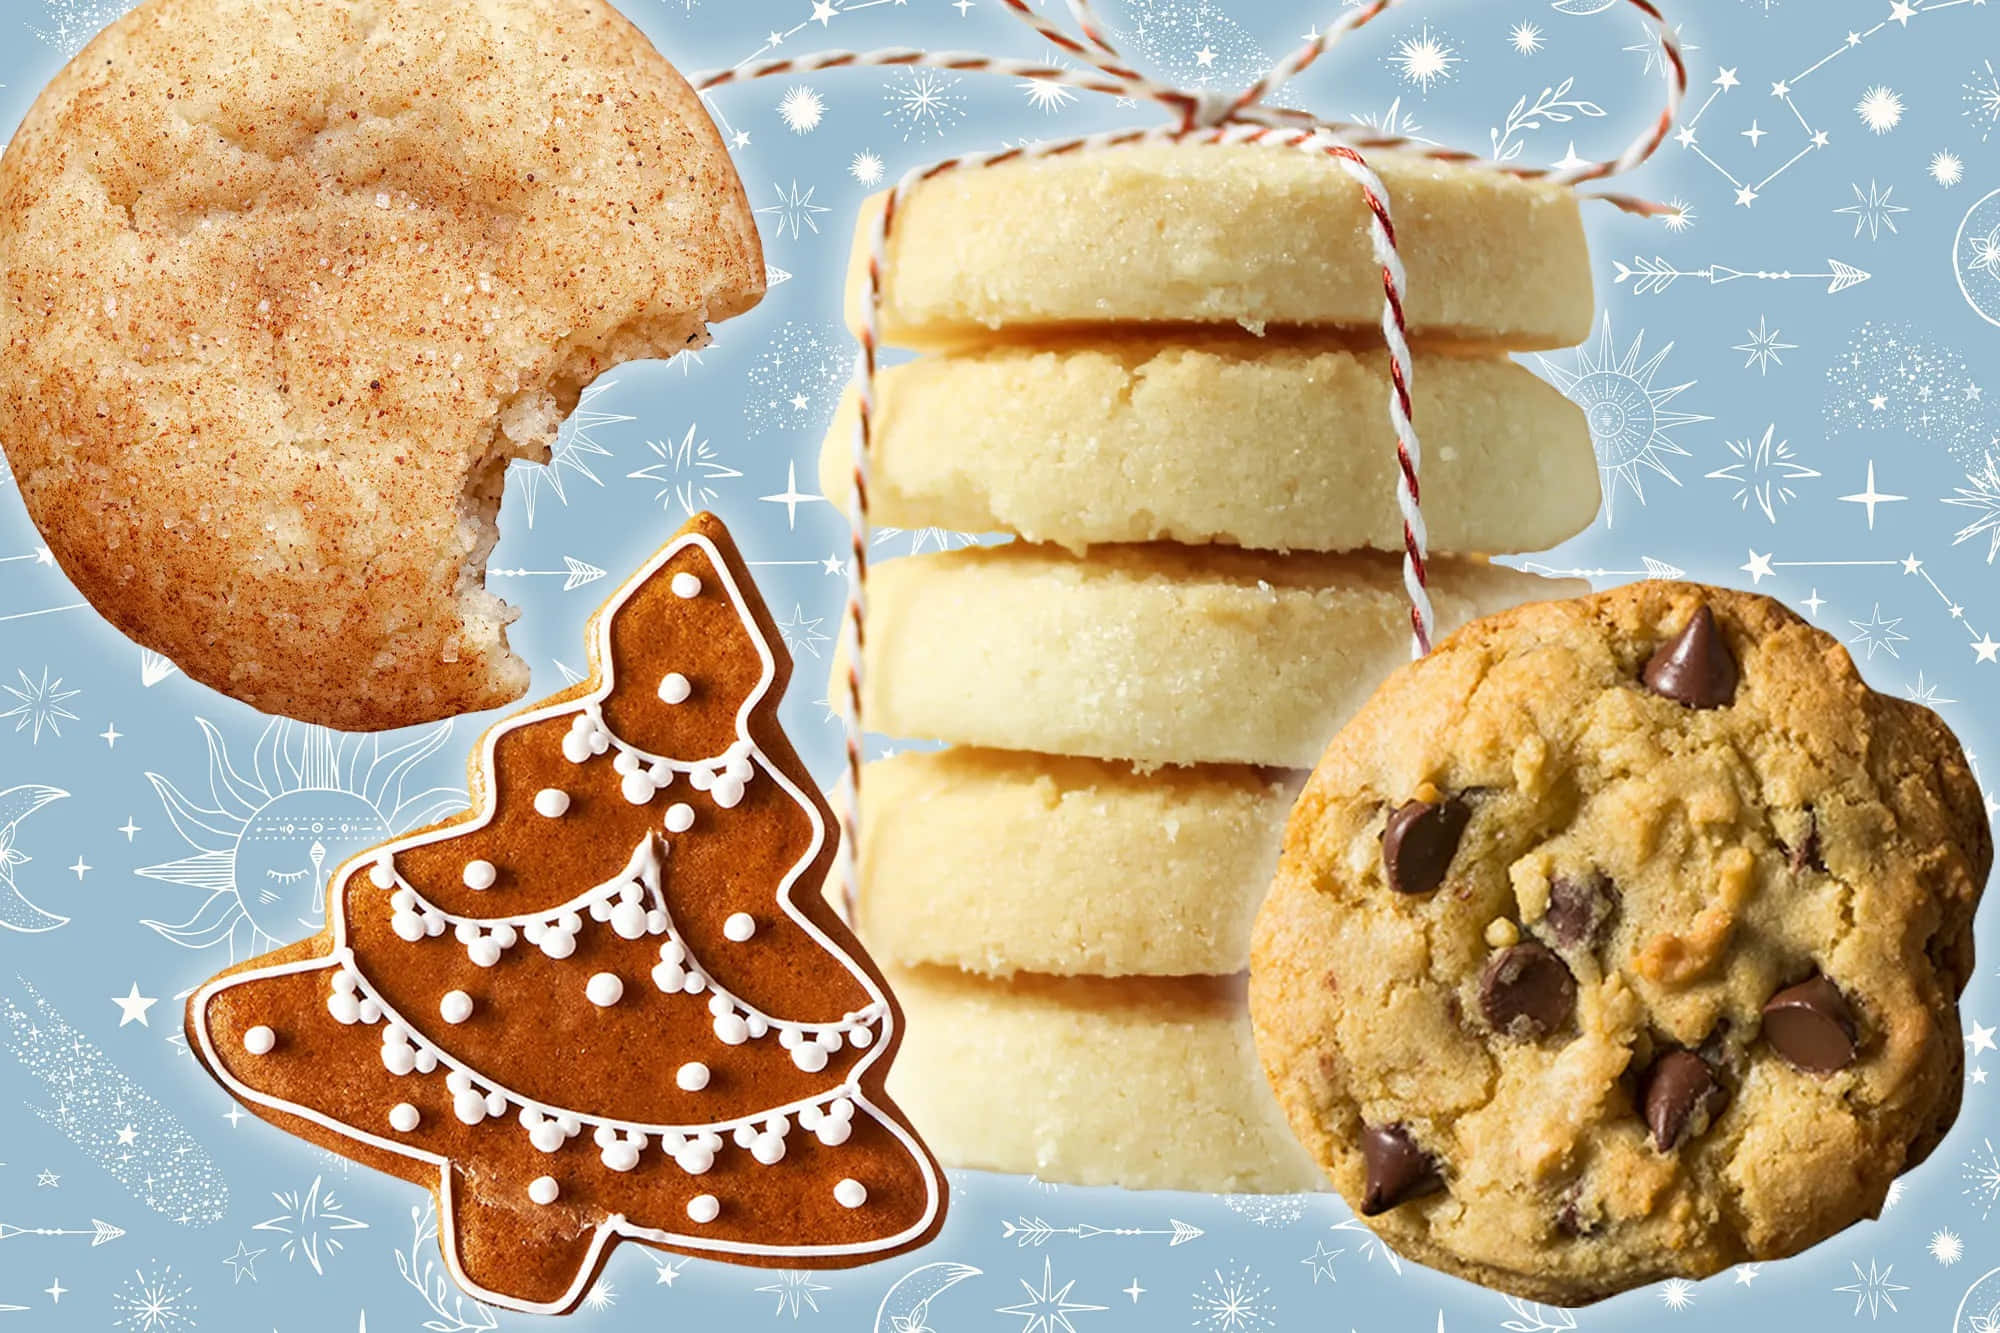 Enjoy the sweet flavors of delicious cookies!